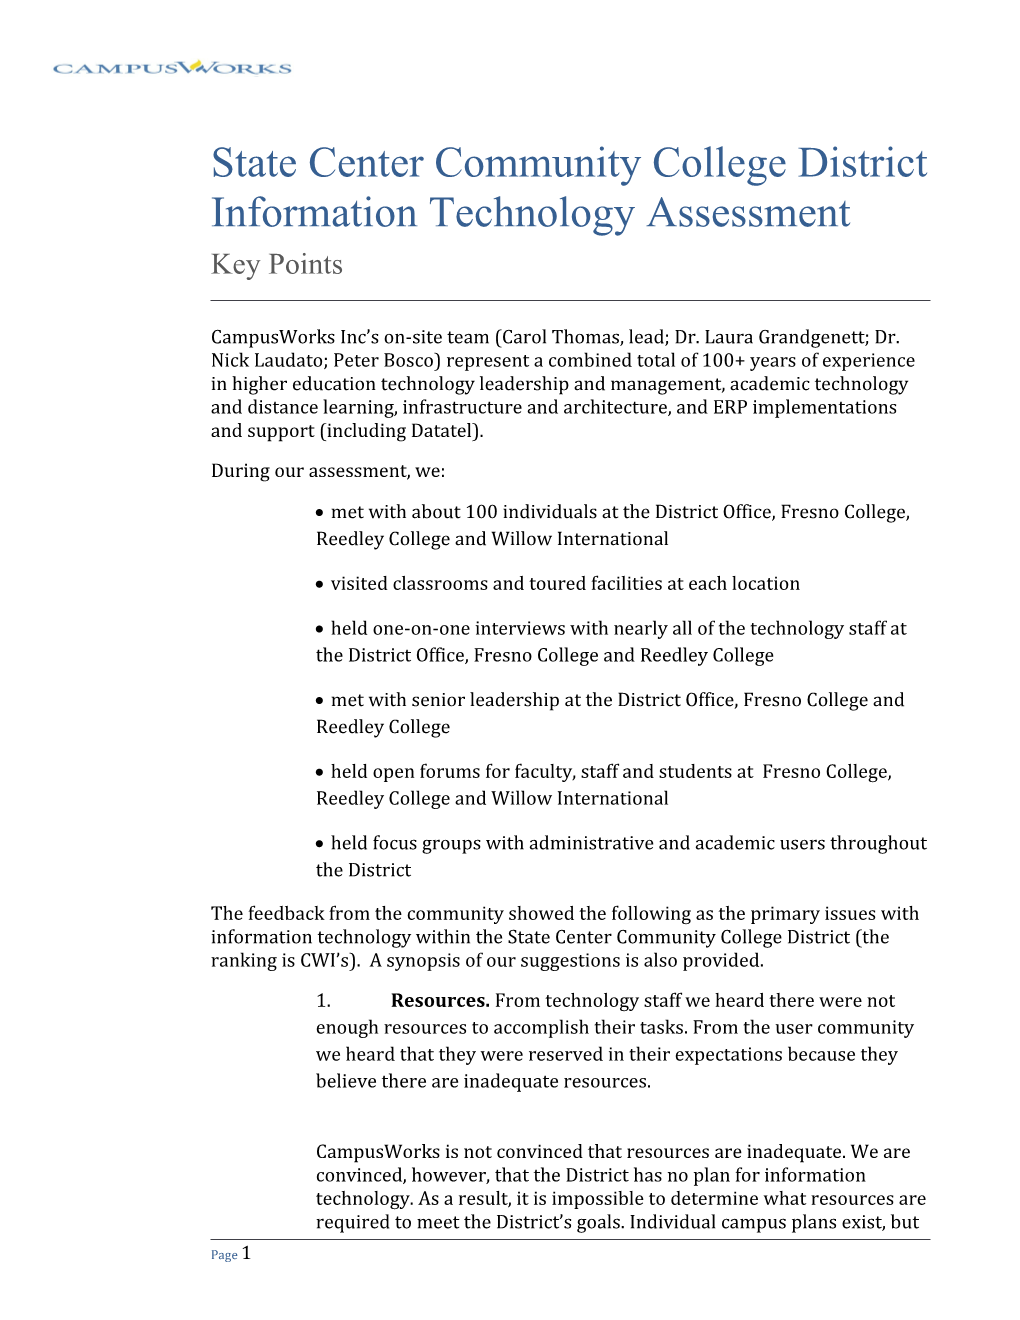 State Center Community College District Information Technology Assessment